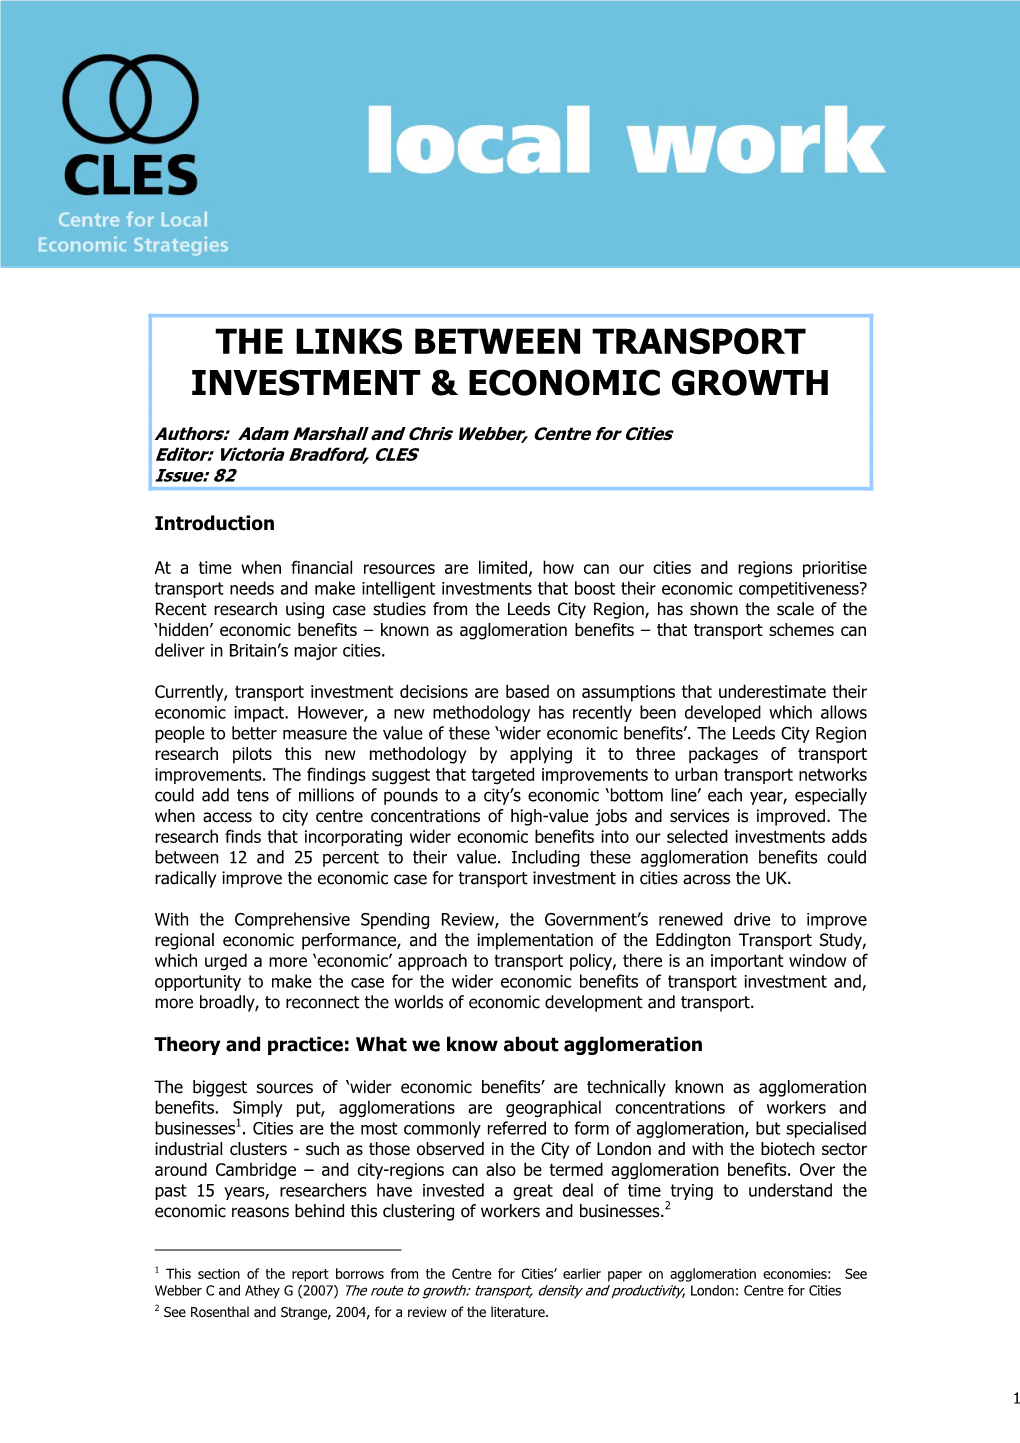 The Links Between Transport Investment & Economic